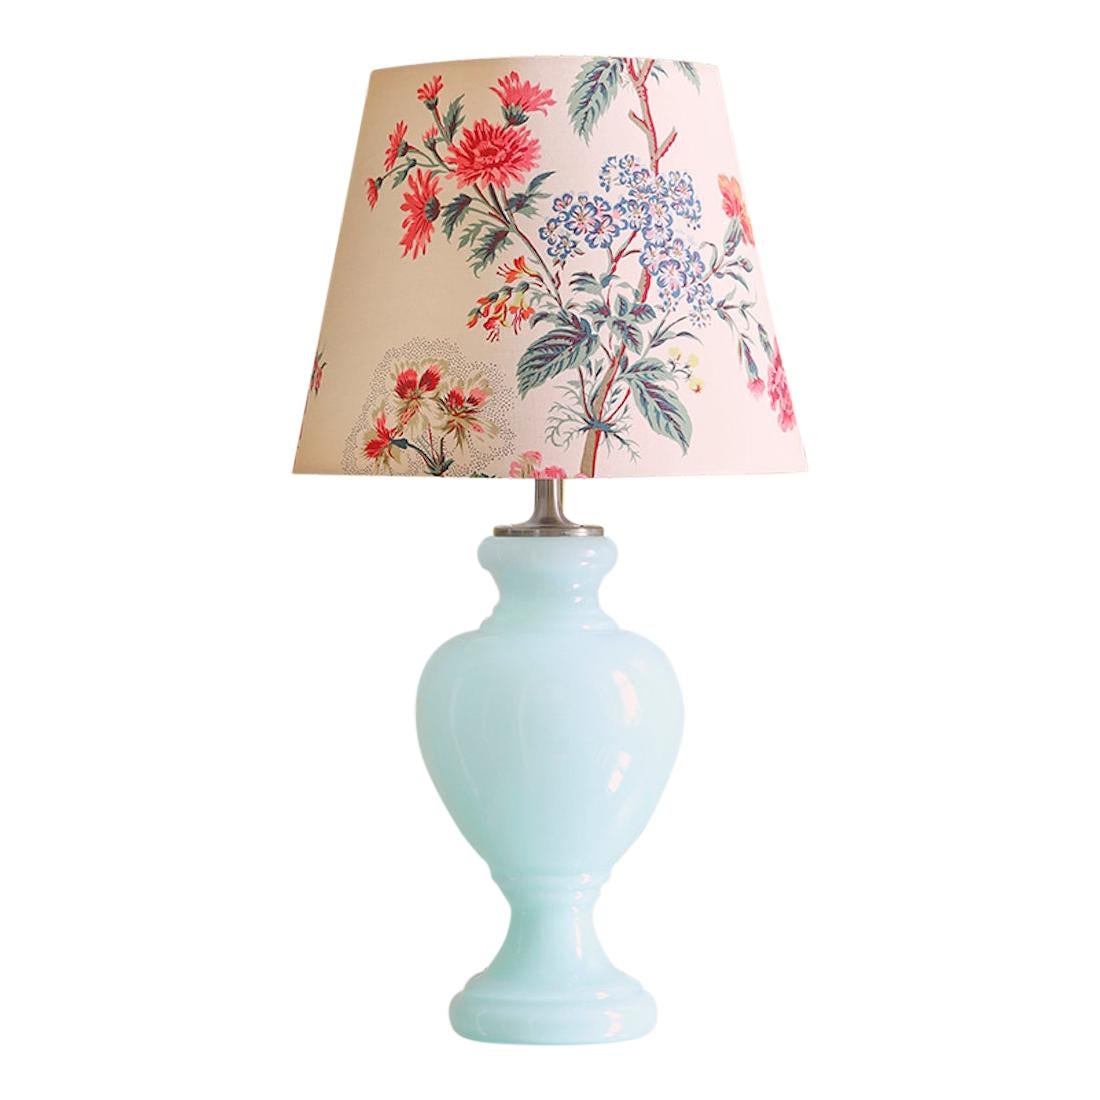 Vintage Opaline Glass Table Lamp in Turquoise, Denmark, Late 20th Century